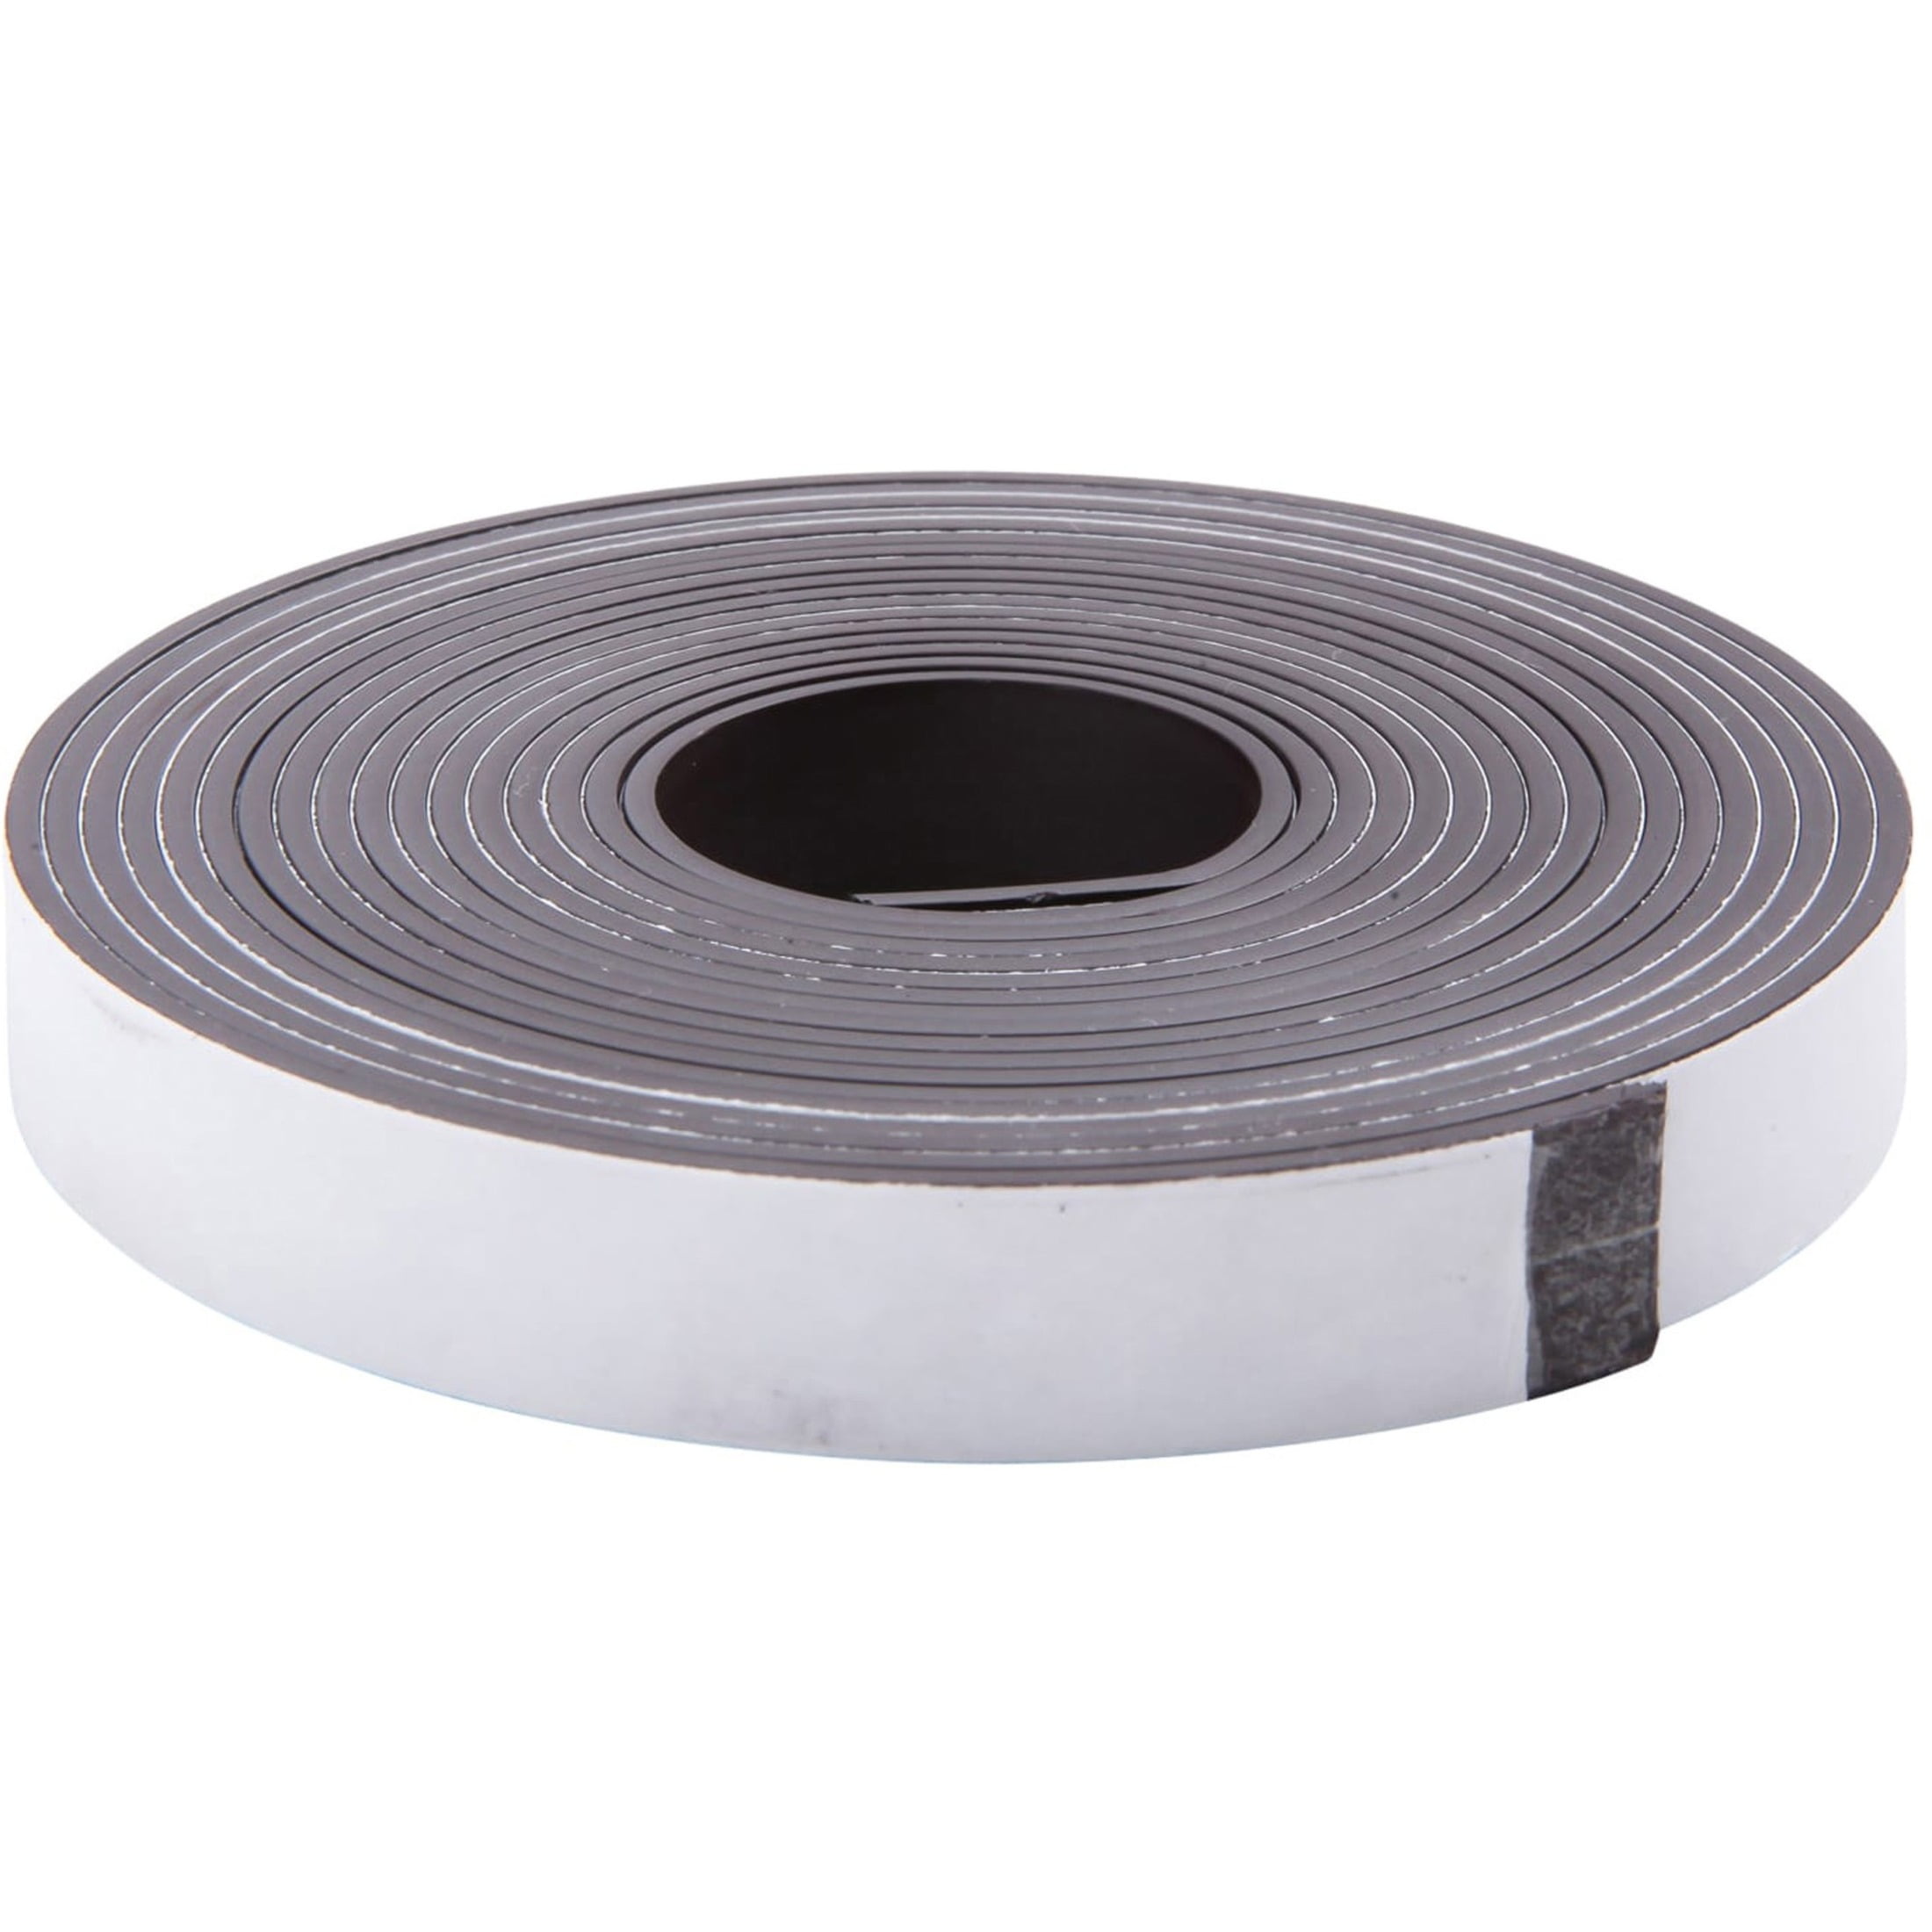 Magnetic Strip Tape 10Ft Flexible Roll Adhesive Backed Magnet Strong Sticky  Back